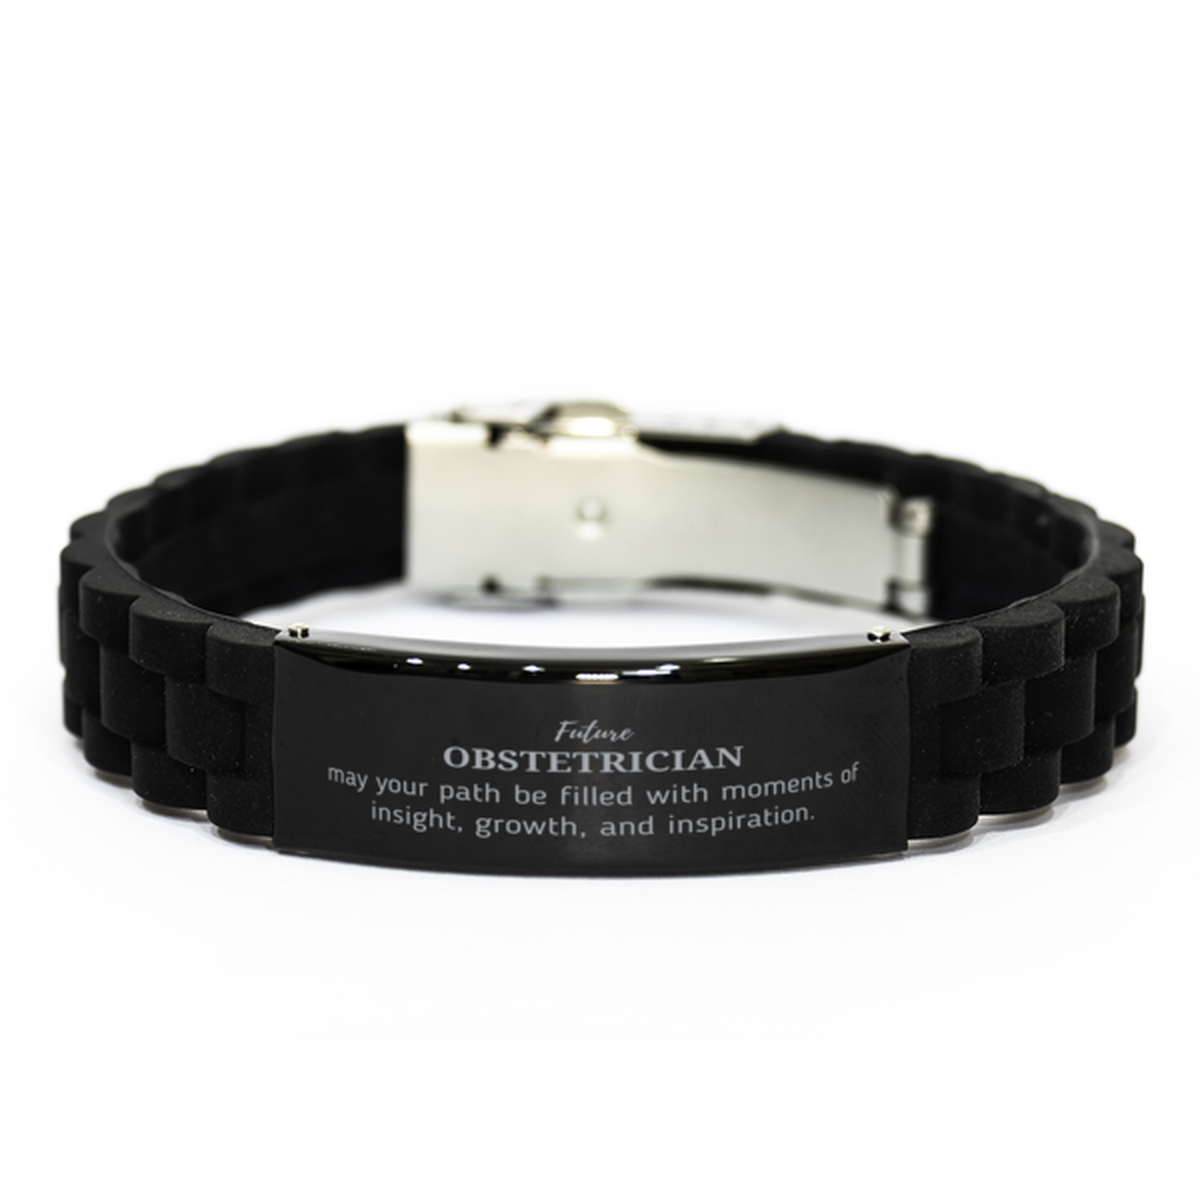 Future Obstetrician Gifts, May your path be filled with moments of insight, Graduation Gifts for New Obstetrician, Christmas Unique Black Glidelock Clasp Bracelet For Men, Women, Friends